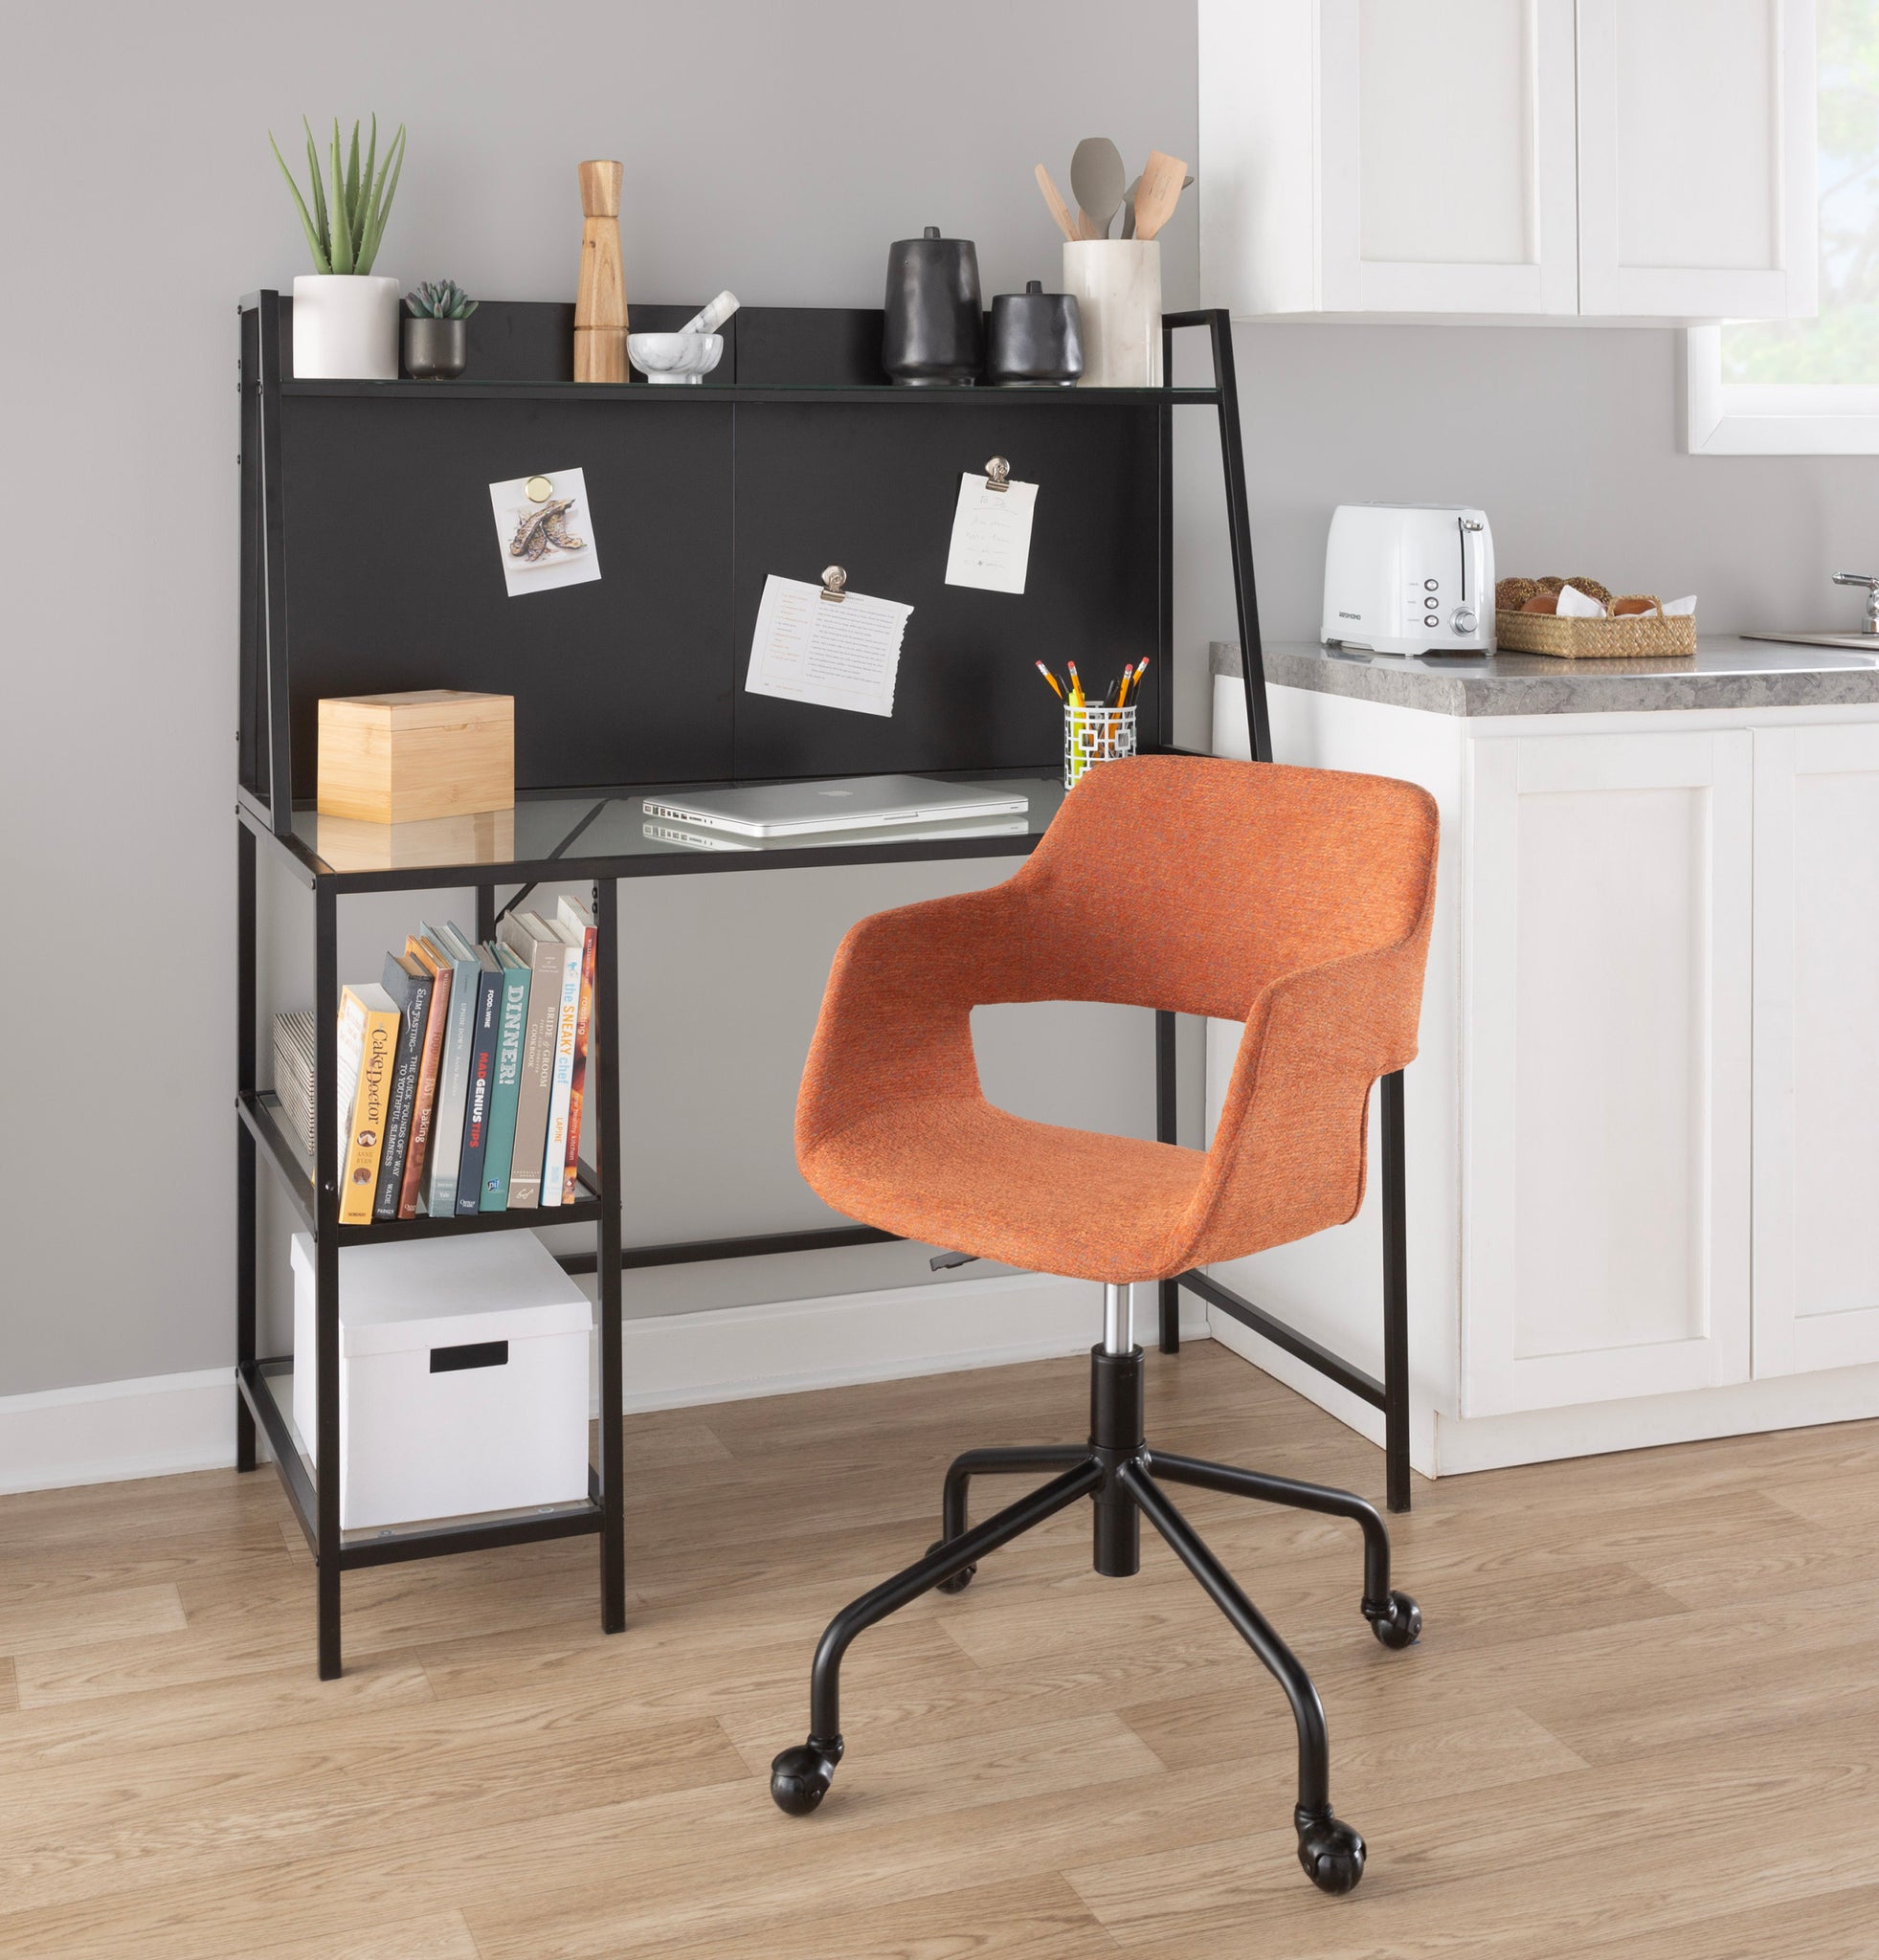 Margarite Contemporary Adjustable Office Chair in orange-fabric